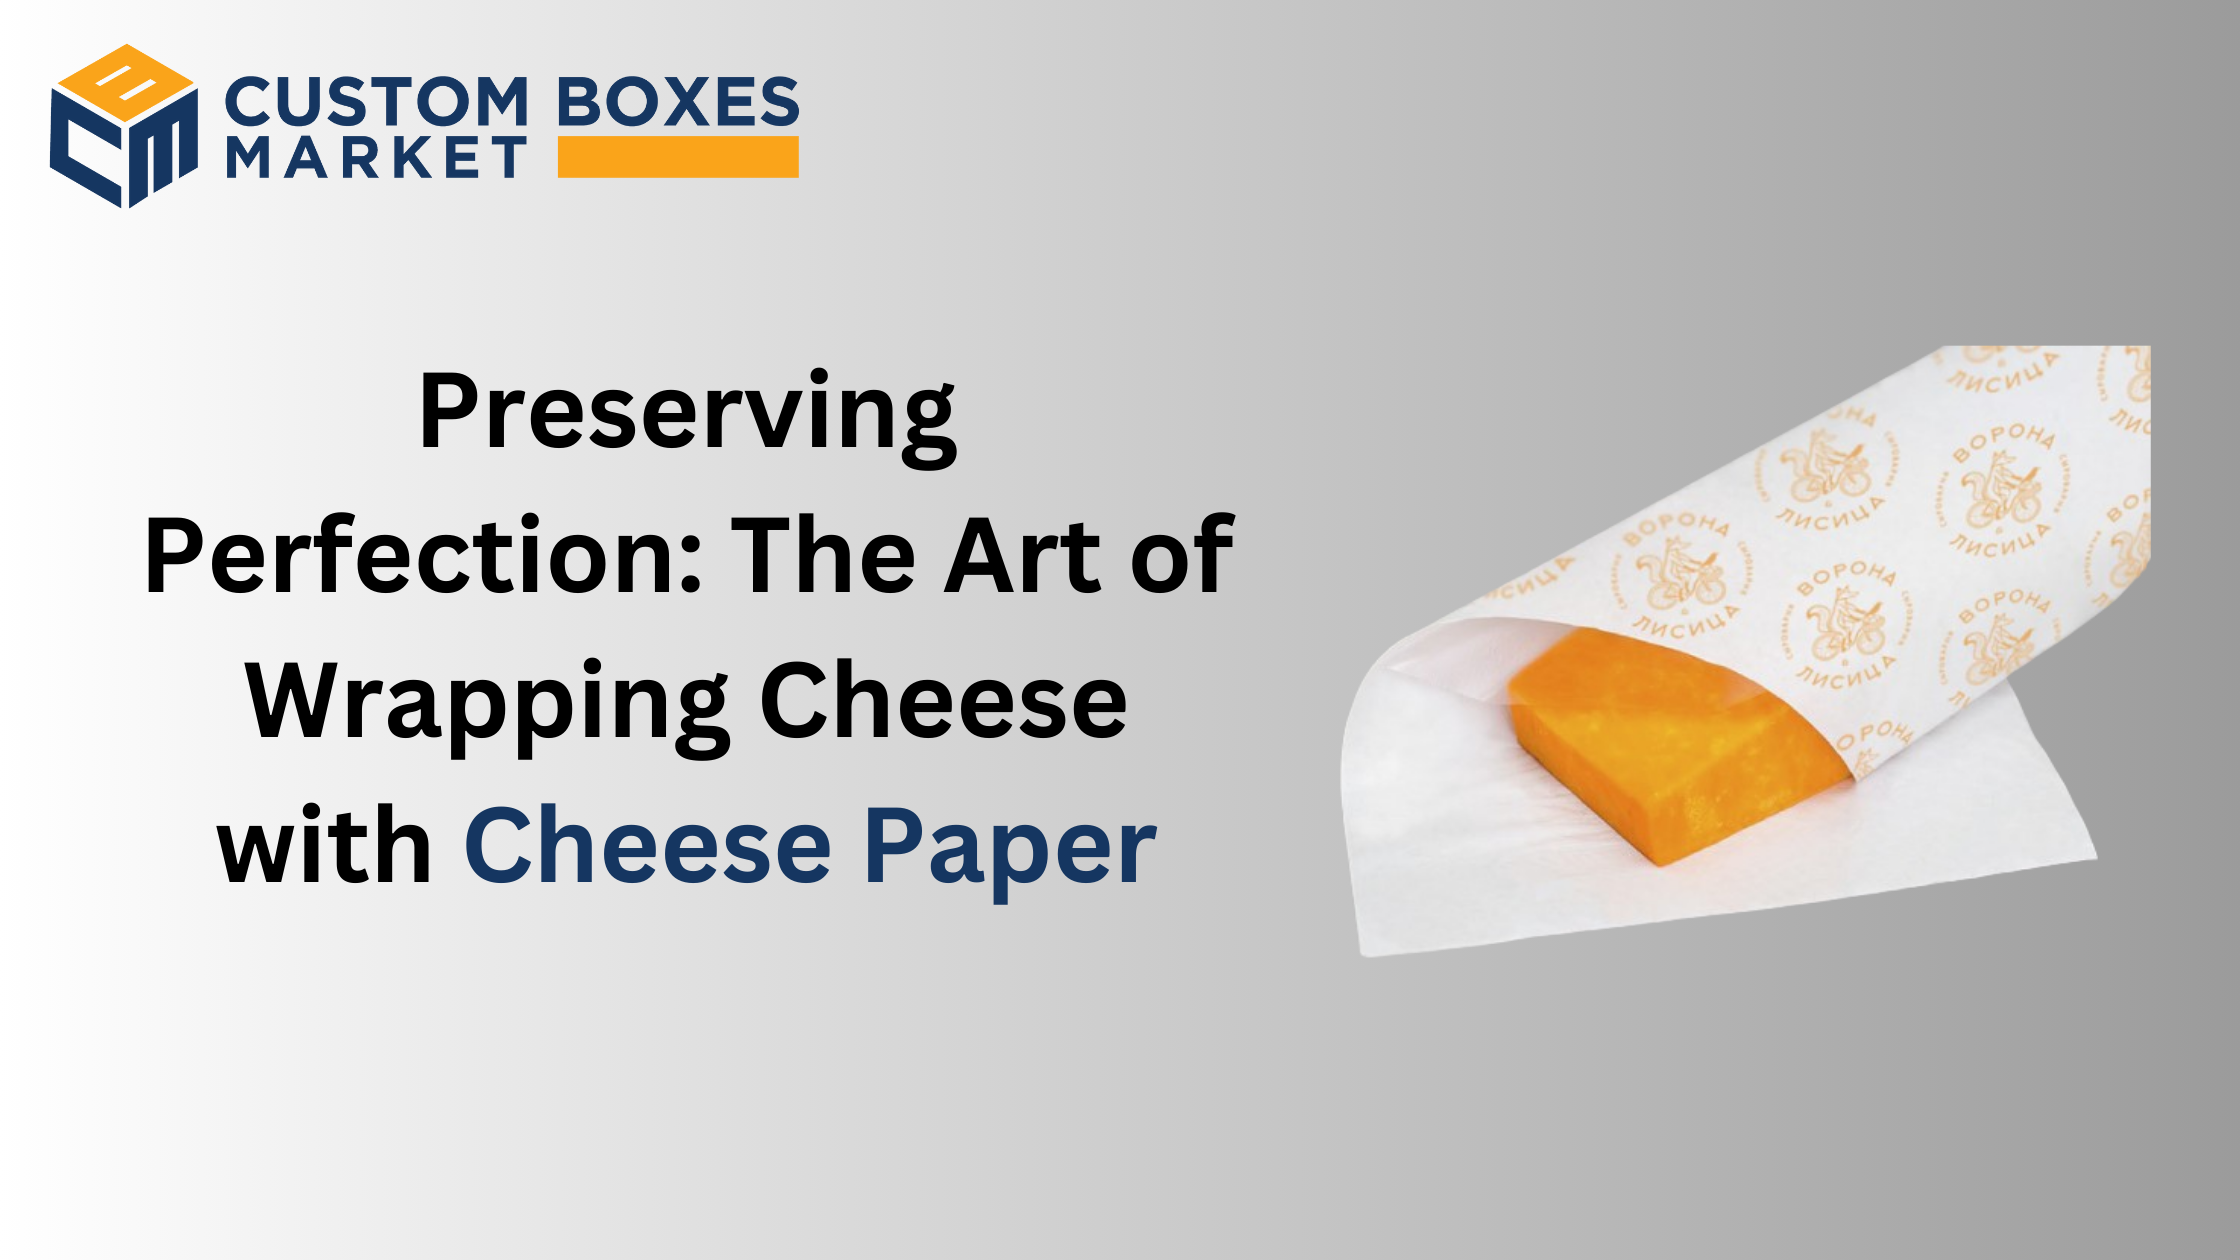 Cheese paper